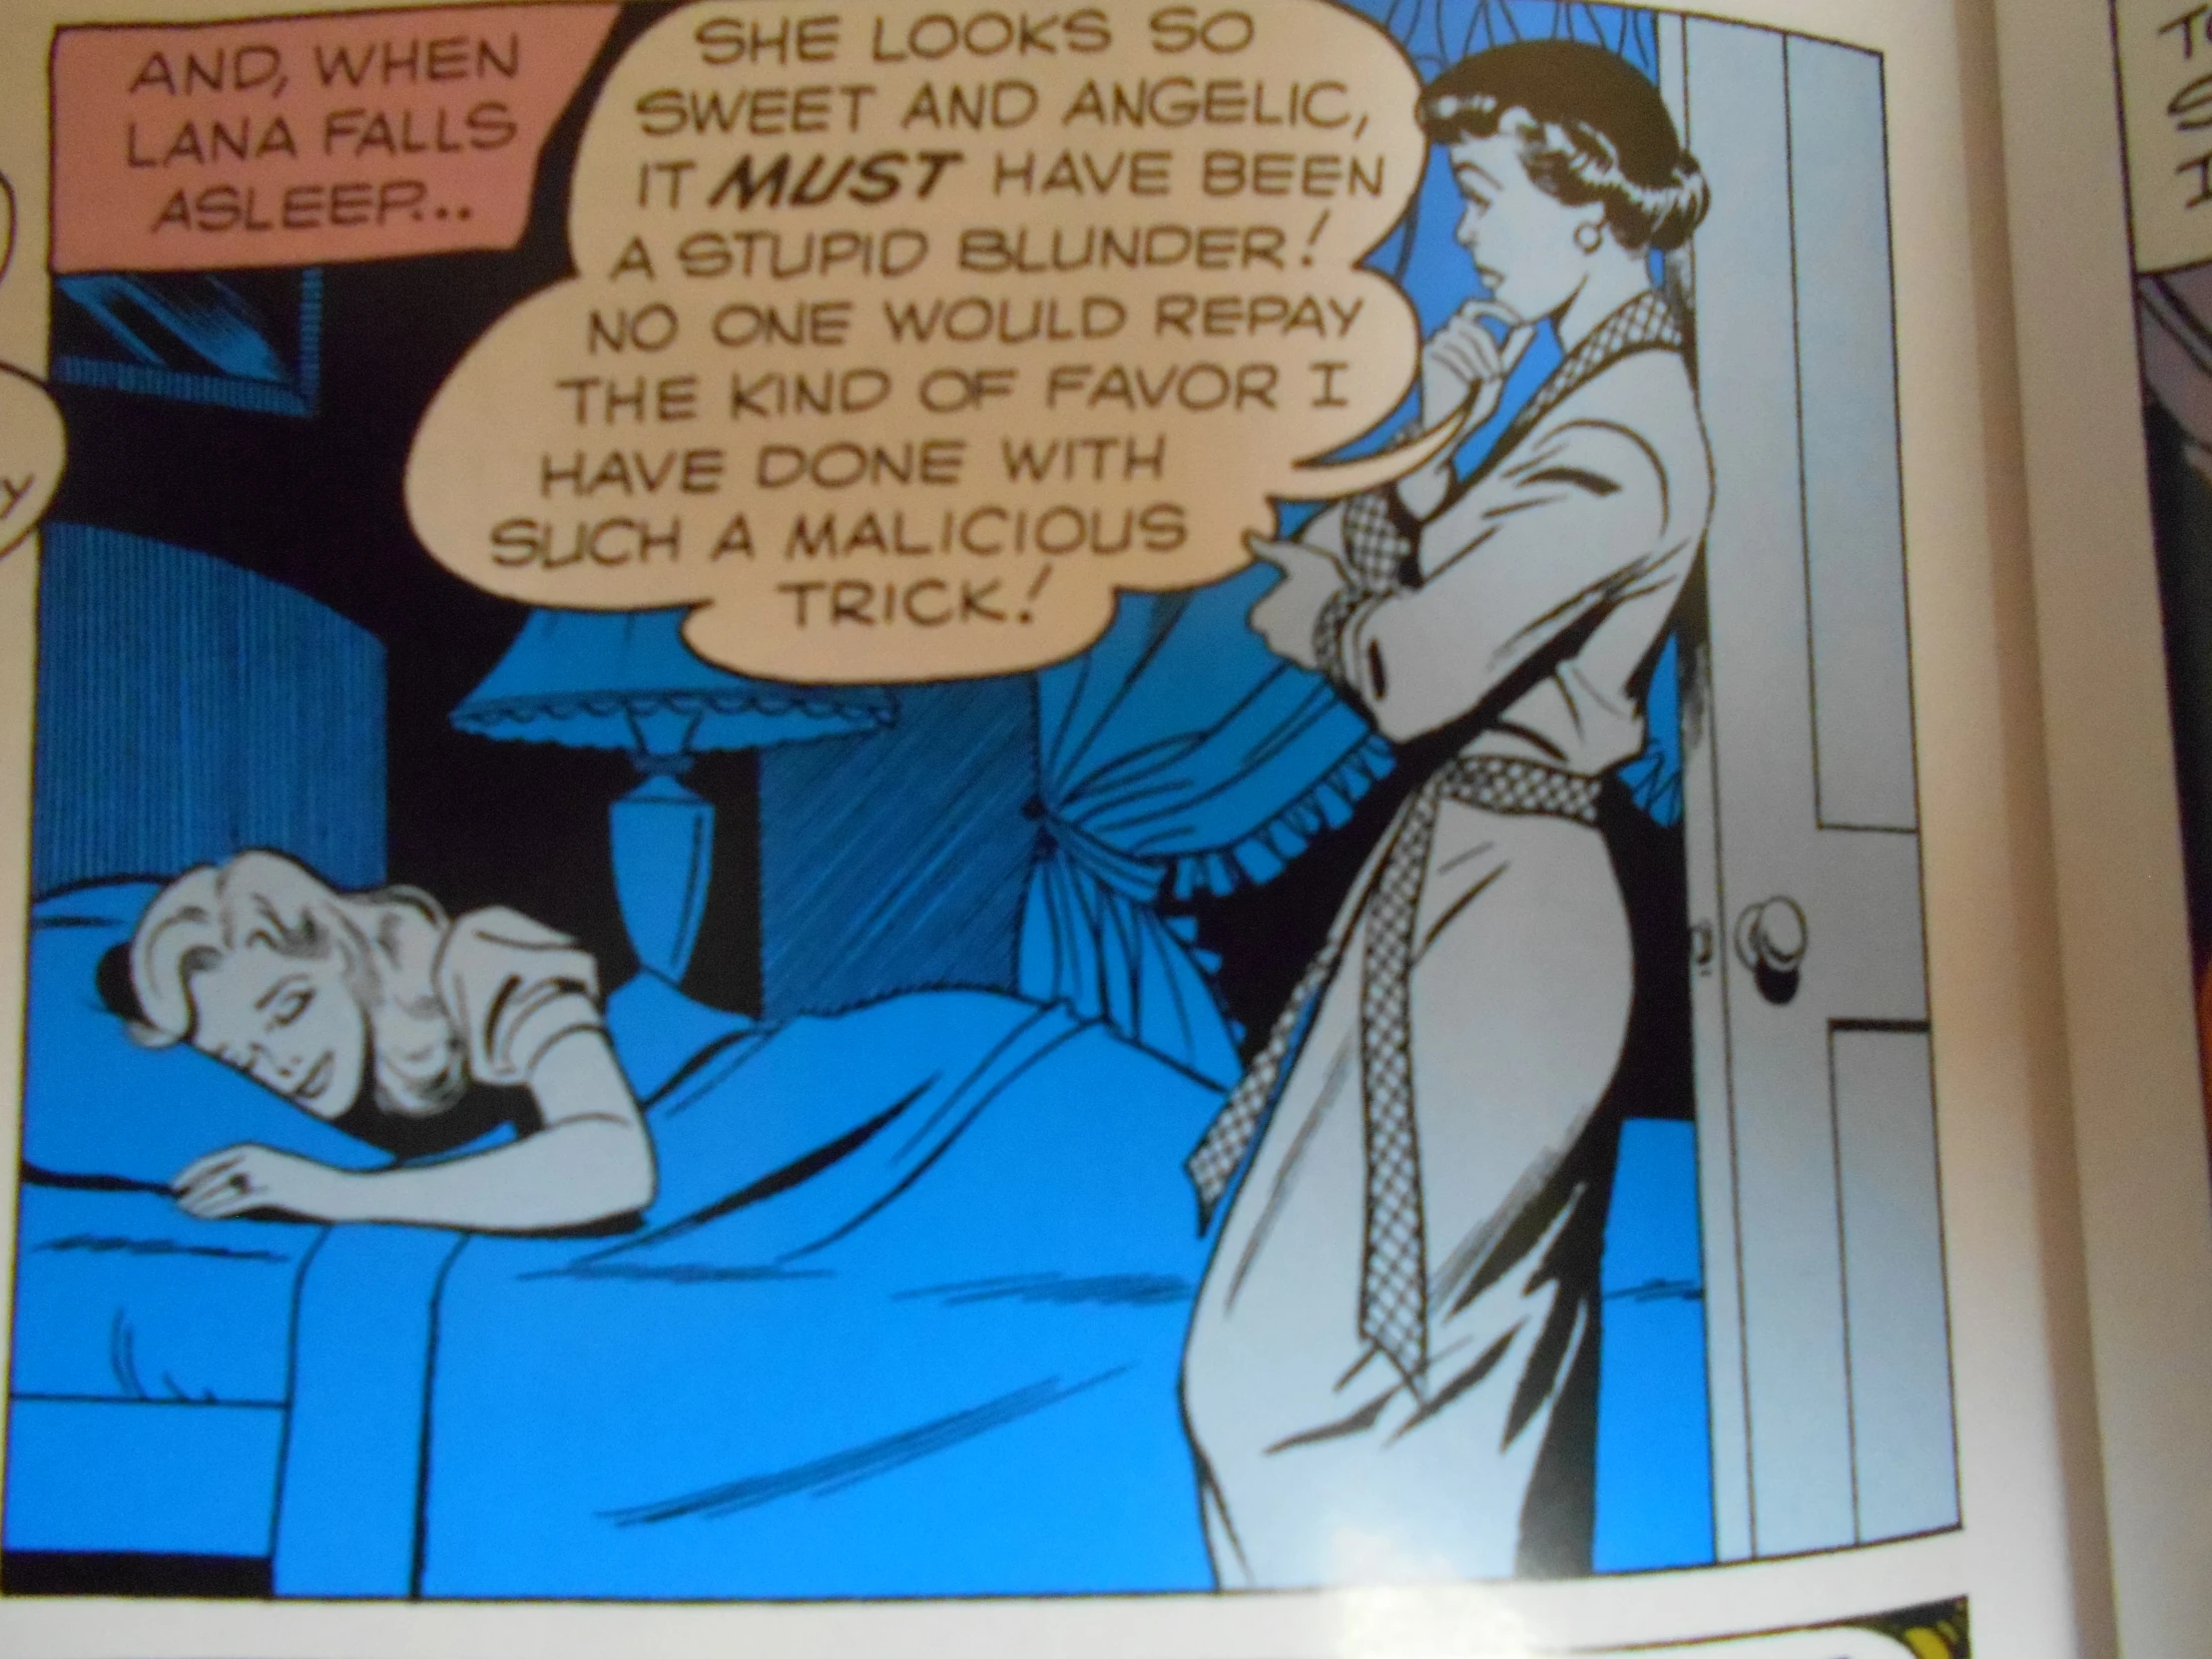 an old comic strip from the 1940s that shows a woman lying in bed while her mom's hand is up next to her chest